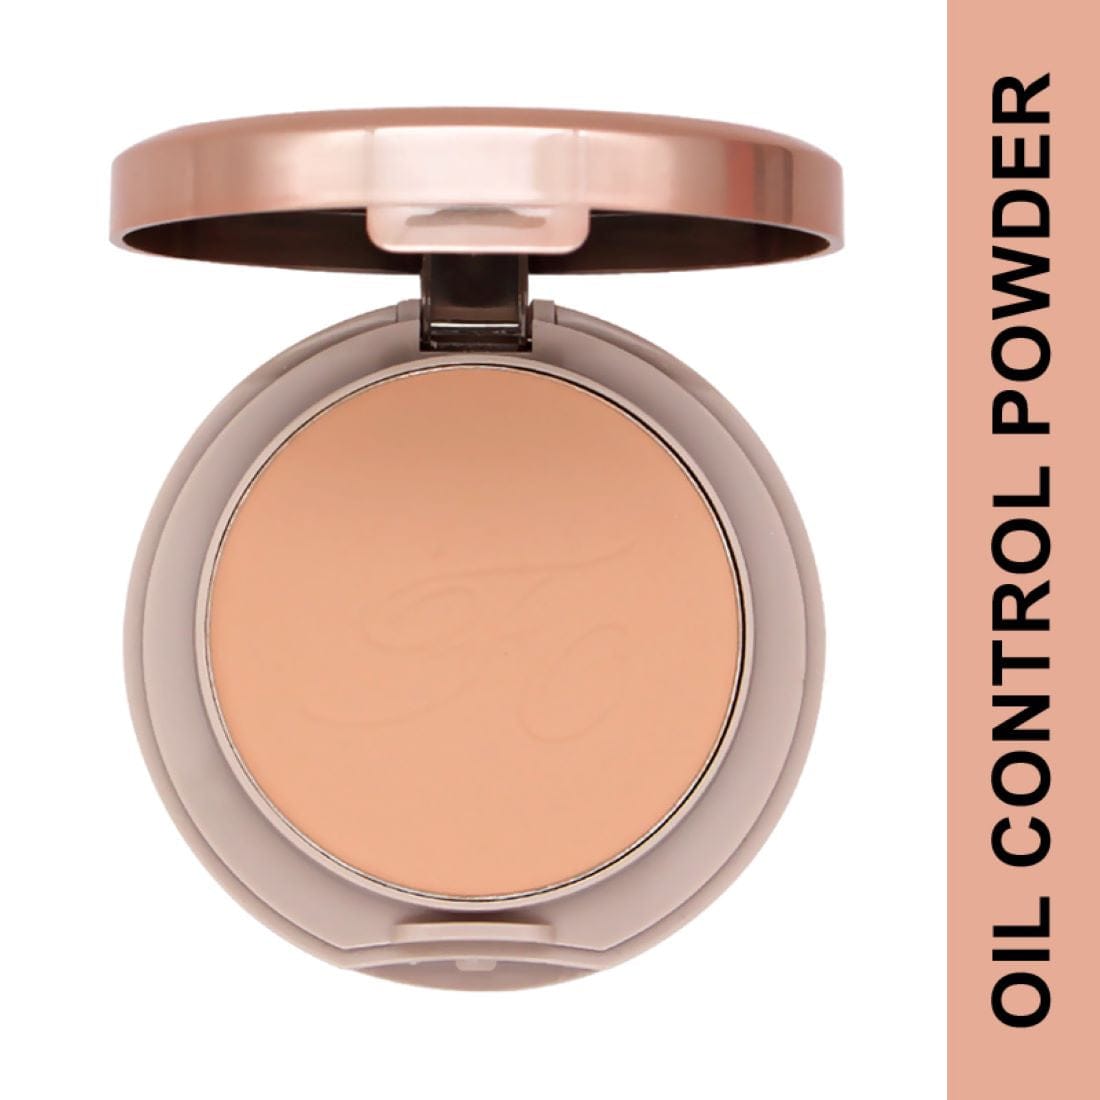 compact powder uses powder foundation for oily skin translucent powder use face powder makeup compact powder foundation pressed powder best loose powder for oily skin best face powder for oily skin makeup powder brush face powder for daily use oil control compact powder best setting powder finishing powder best compact for oily skin natural face powder compact powder brush compact powder shades makeup compact powder best compact powder for daily use natural powders